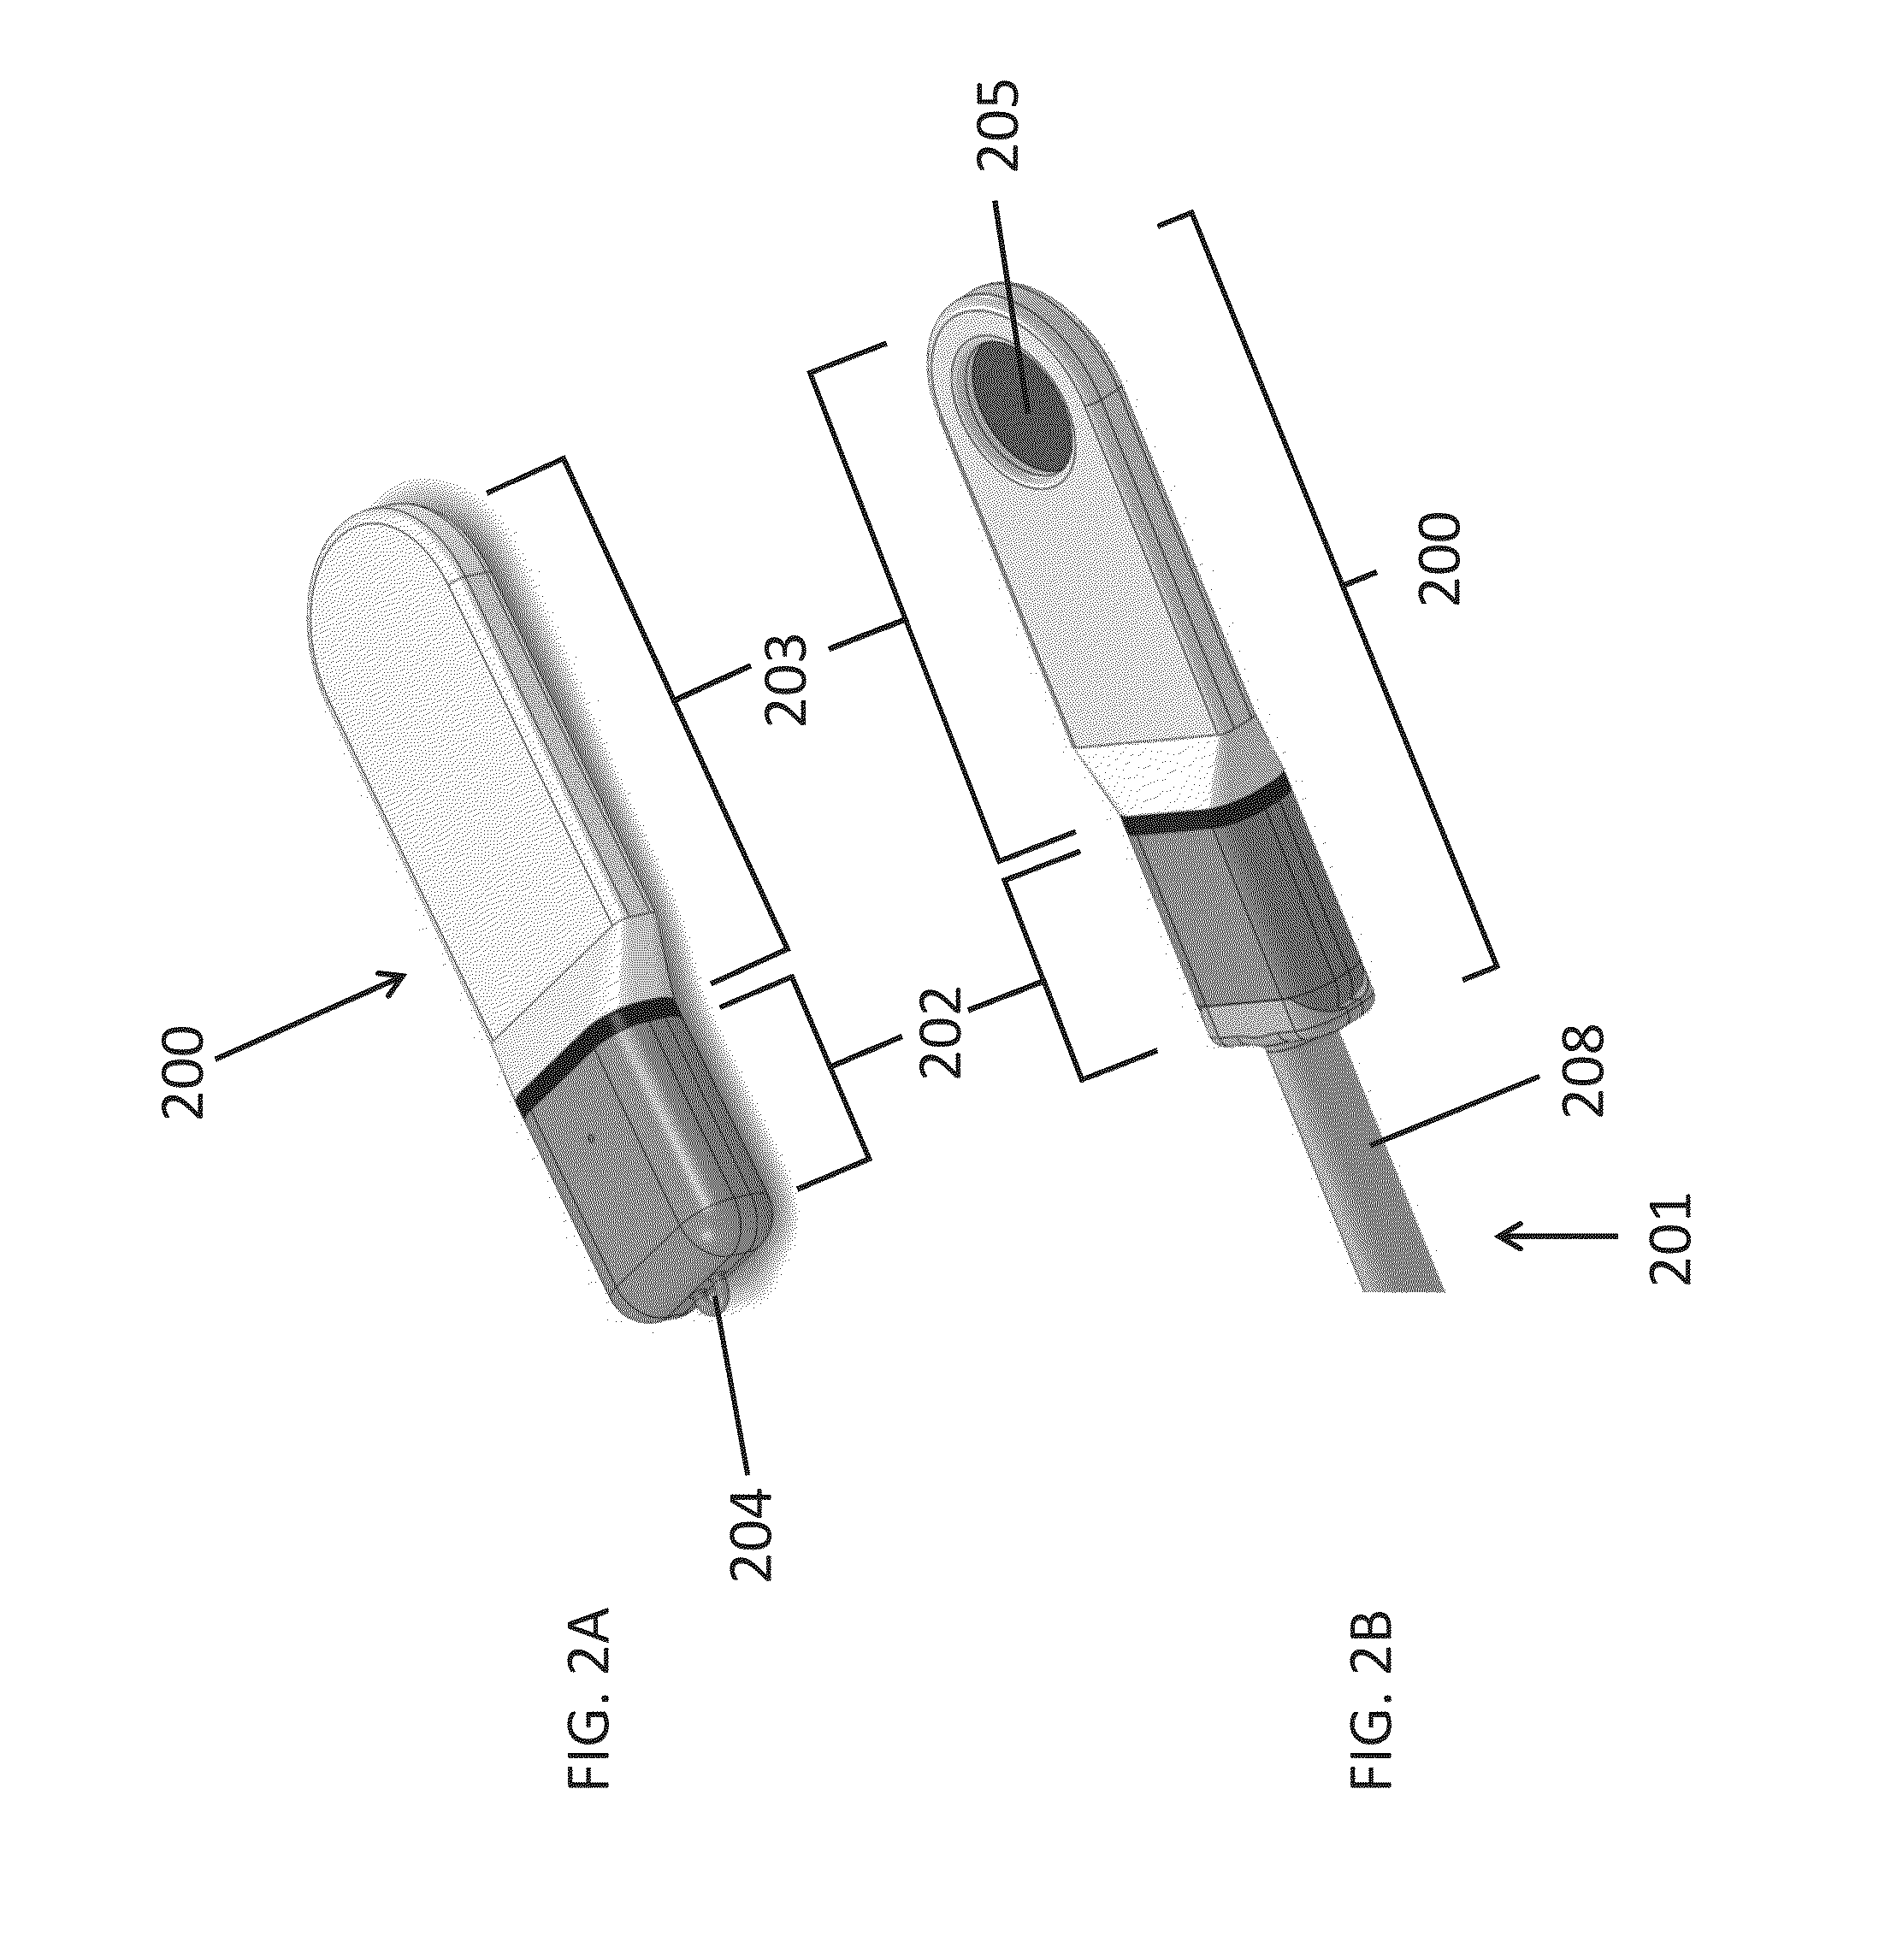 Implantable nasal stimulator systems and methods